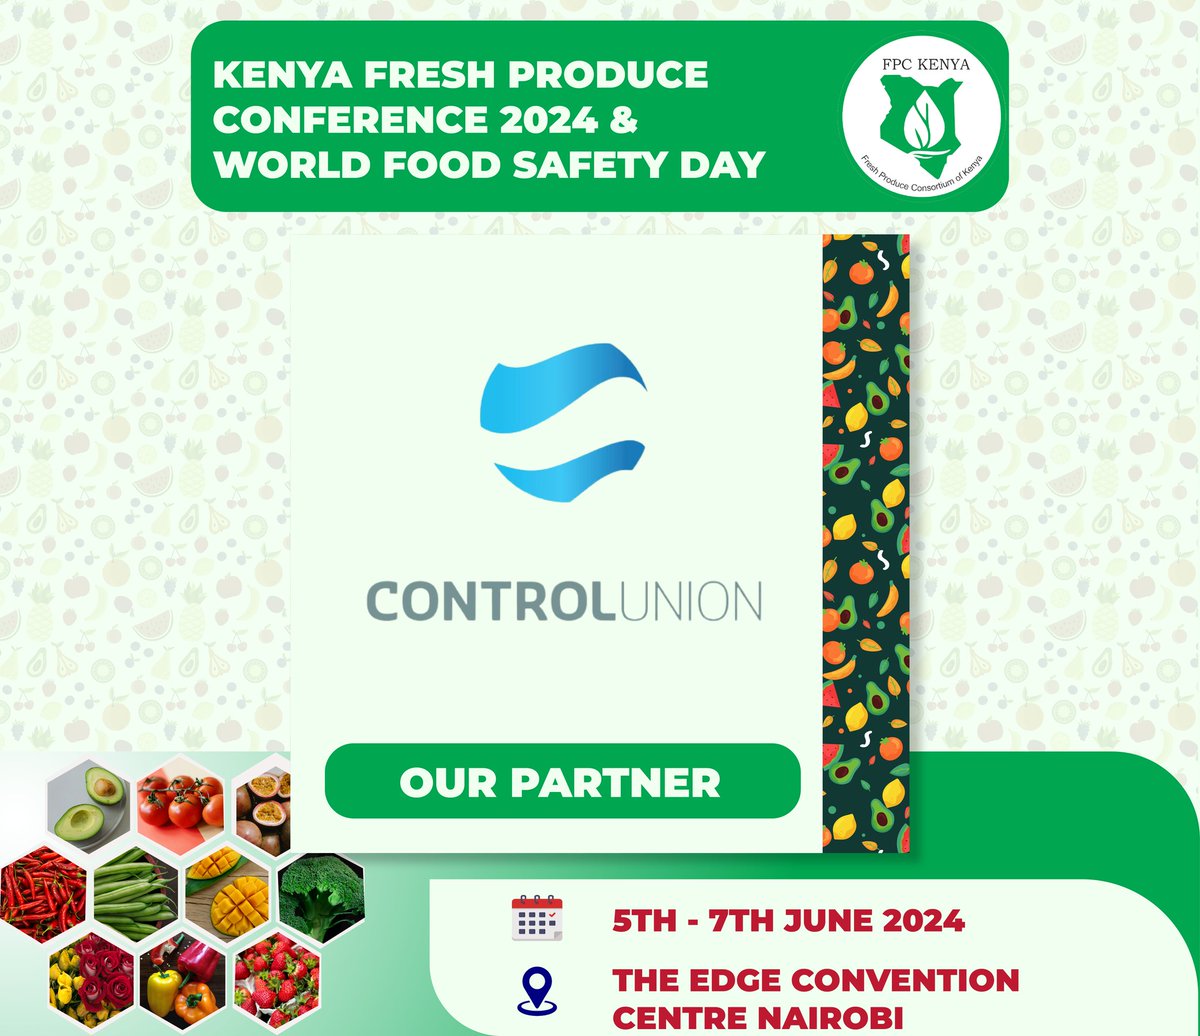 We are honored to welcome @ControlunionKE on board as our esteemed Partner for the upcoming Kenya Fresh Produce Conference 2024 & World Food Safety Day. #freshproduce #conference #avocado